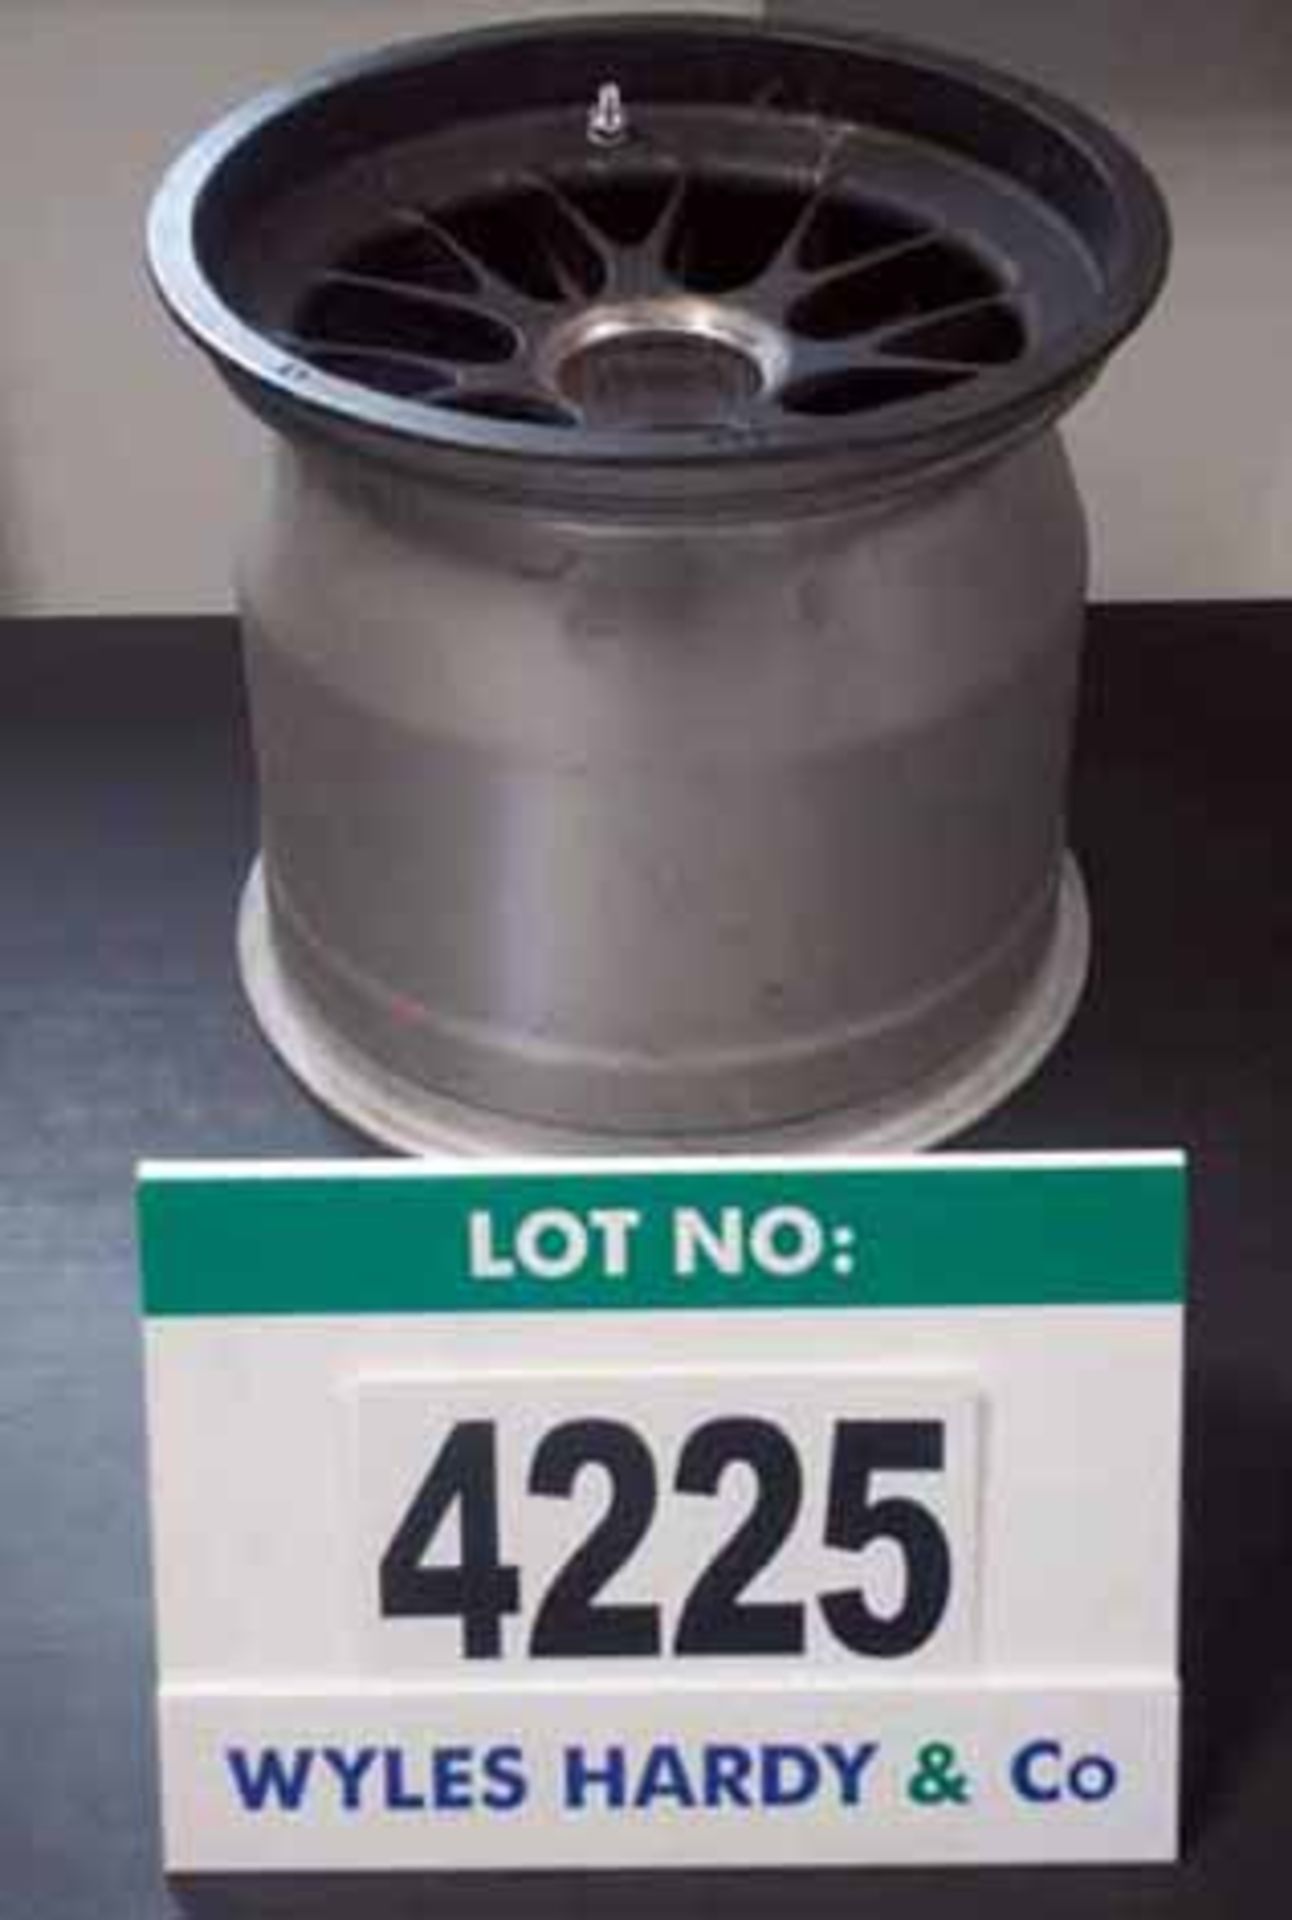 A BBS Formula One Race Car Front Wheel (Want it Shipped? http://bit.ly/1wIhCEv)